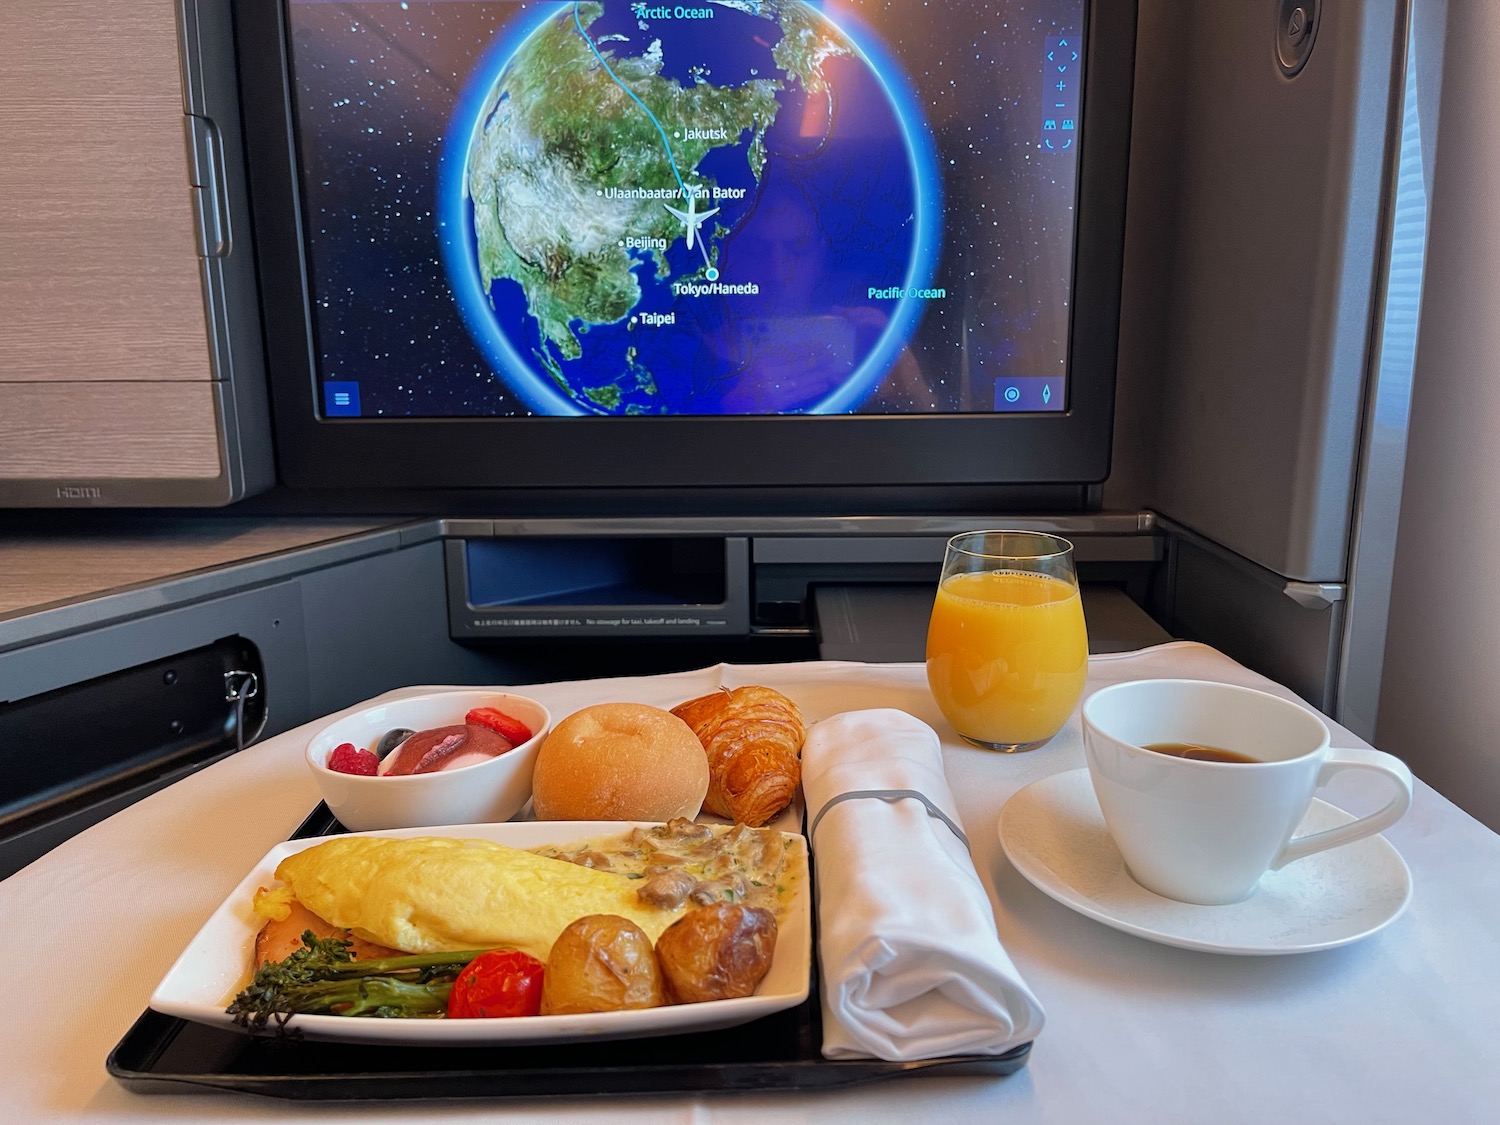 a tray of food and a cup of coffee on a table with a television